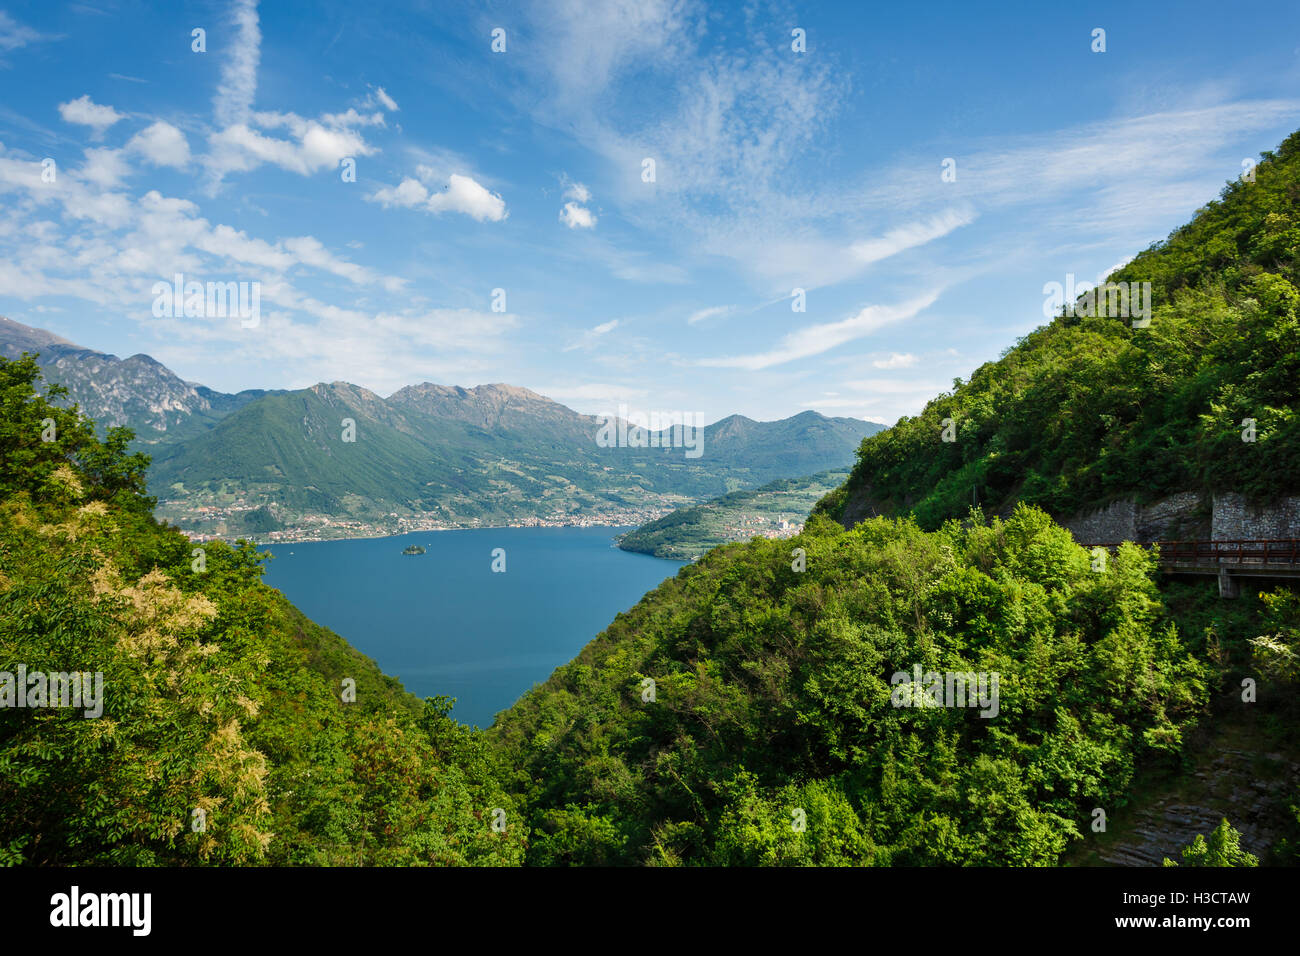 Landscape of Lake Iseo in North Italy Stock Photo